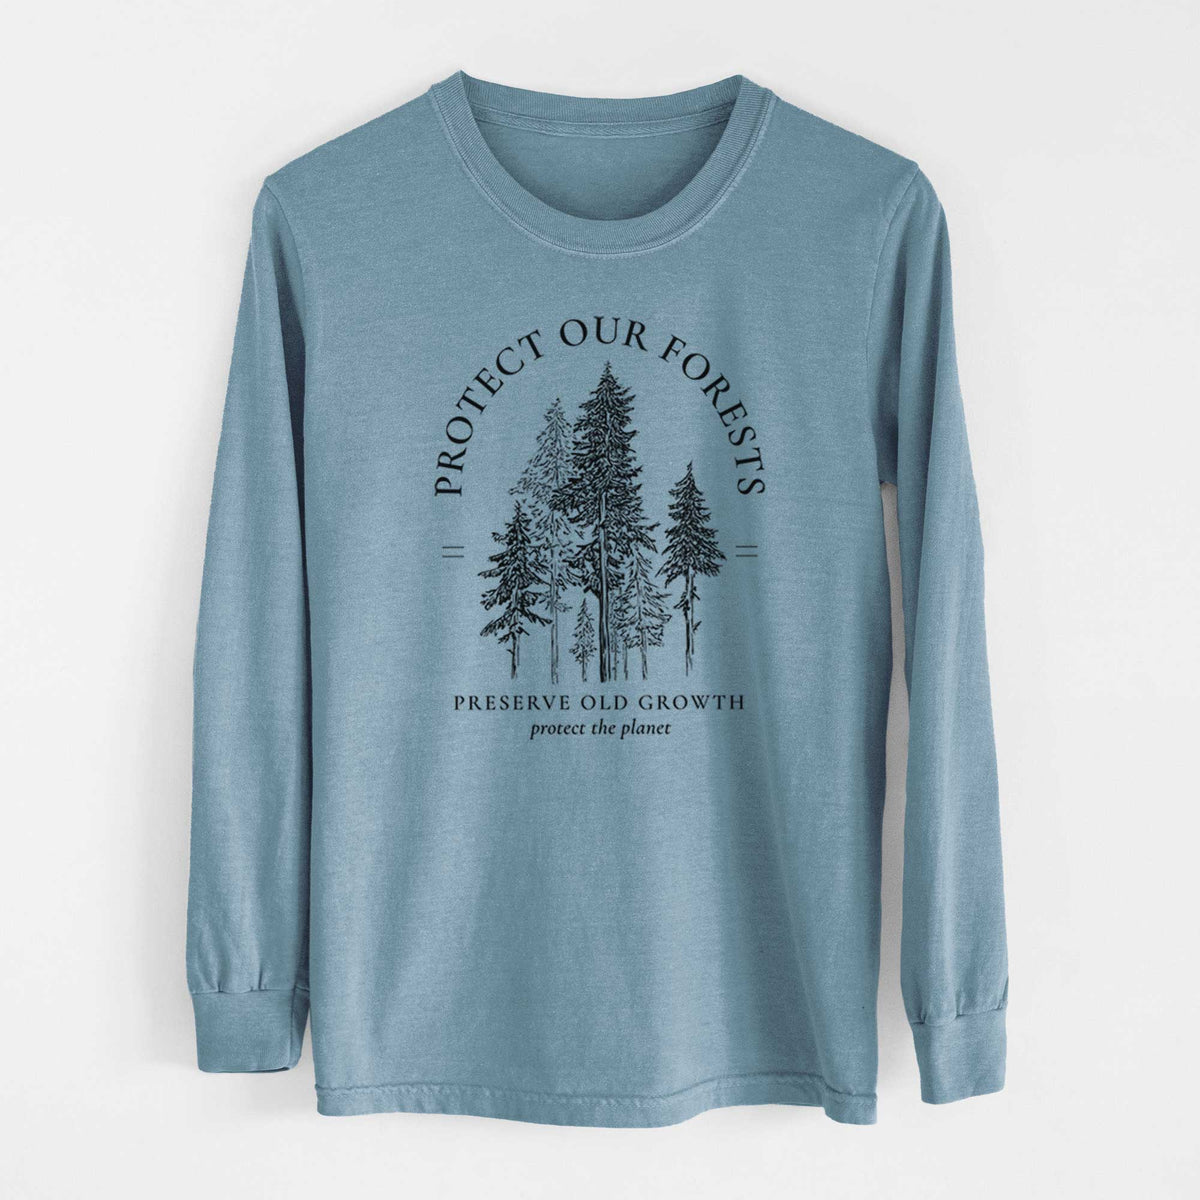 Protect our Forests - Preserve Old Growth - Heavyweight 100% Cotton Long Sleeve